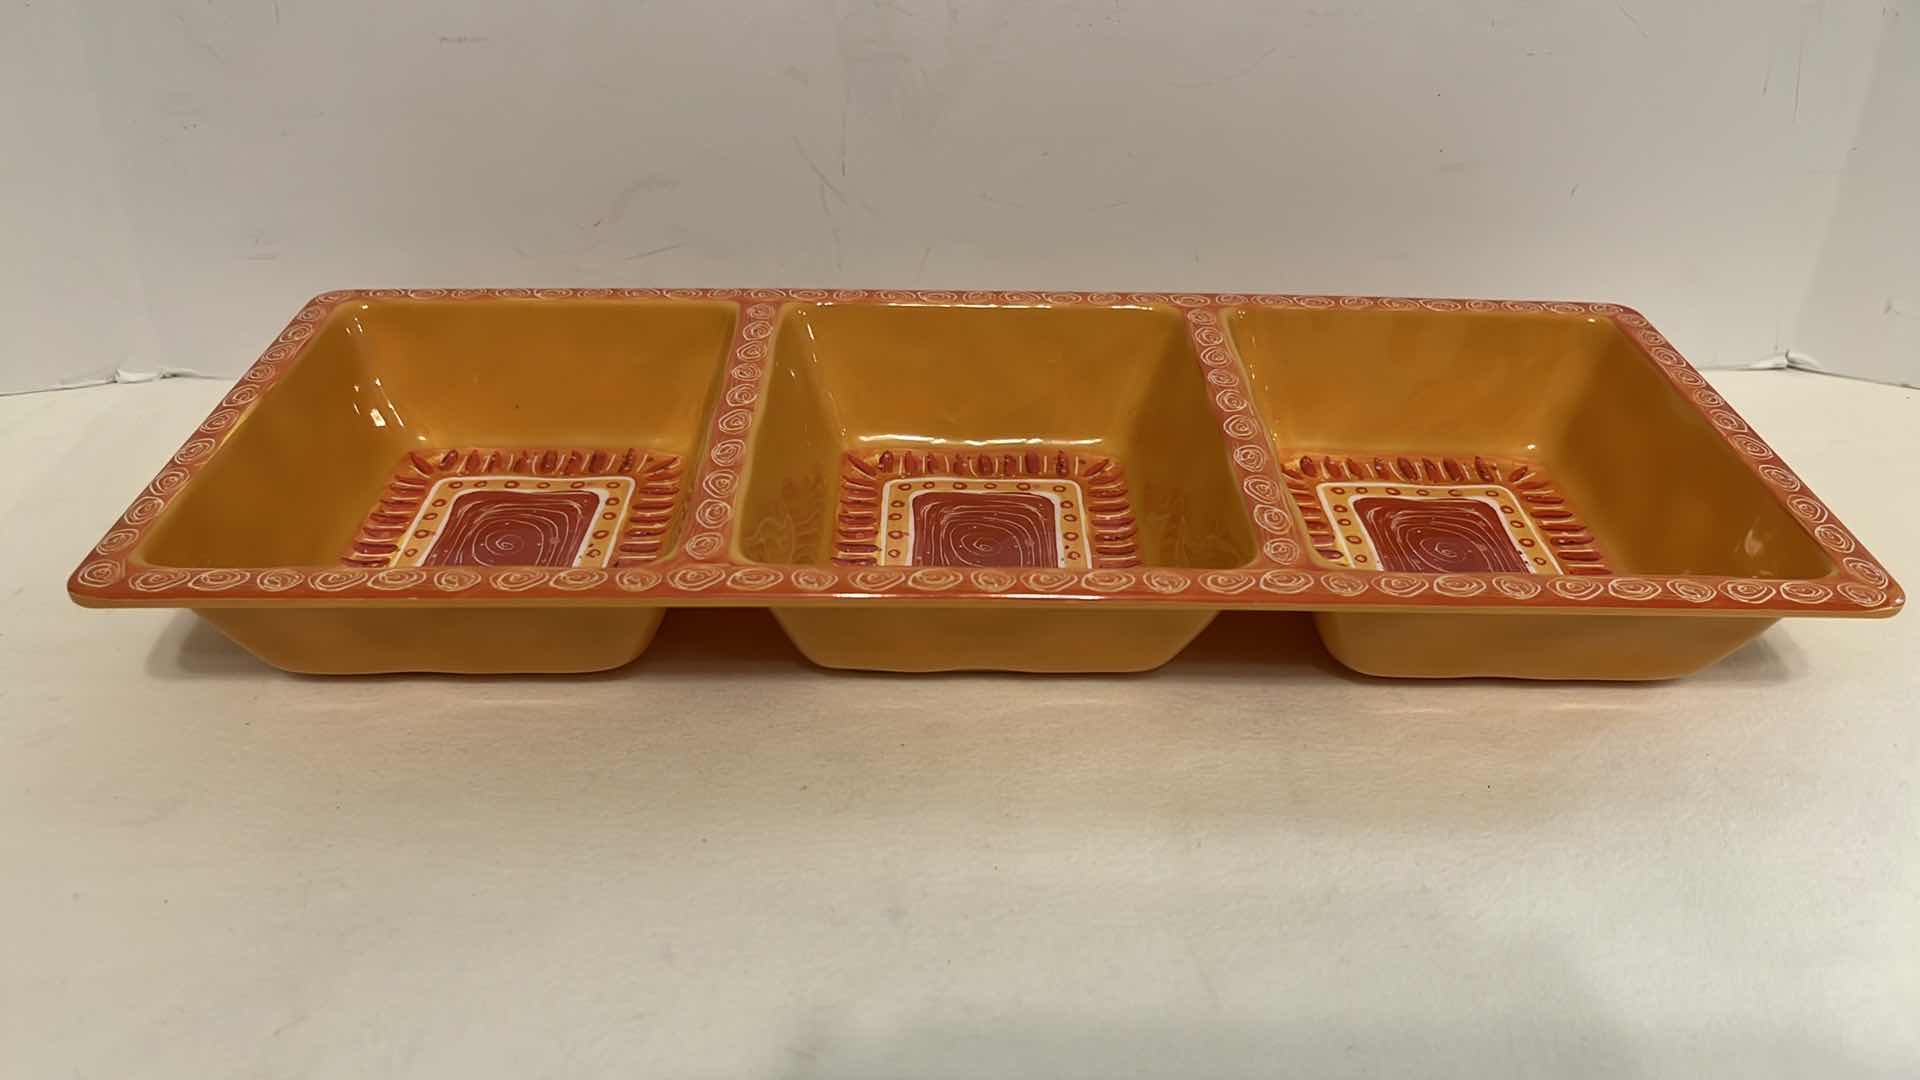 Photo 4 of CERTIFIED INTERNATIONAL MEXICAN FIESTA MELAMINE CHIP & DIP TRAYS (3)